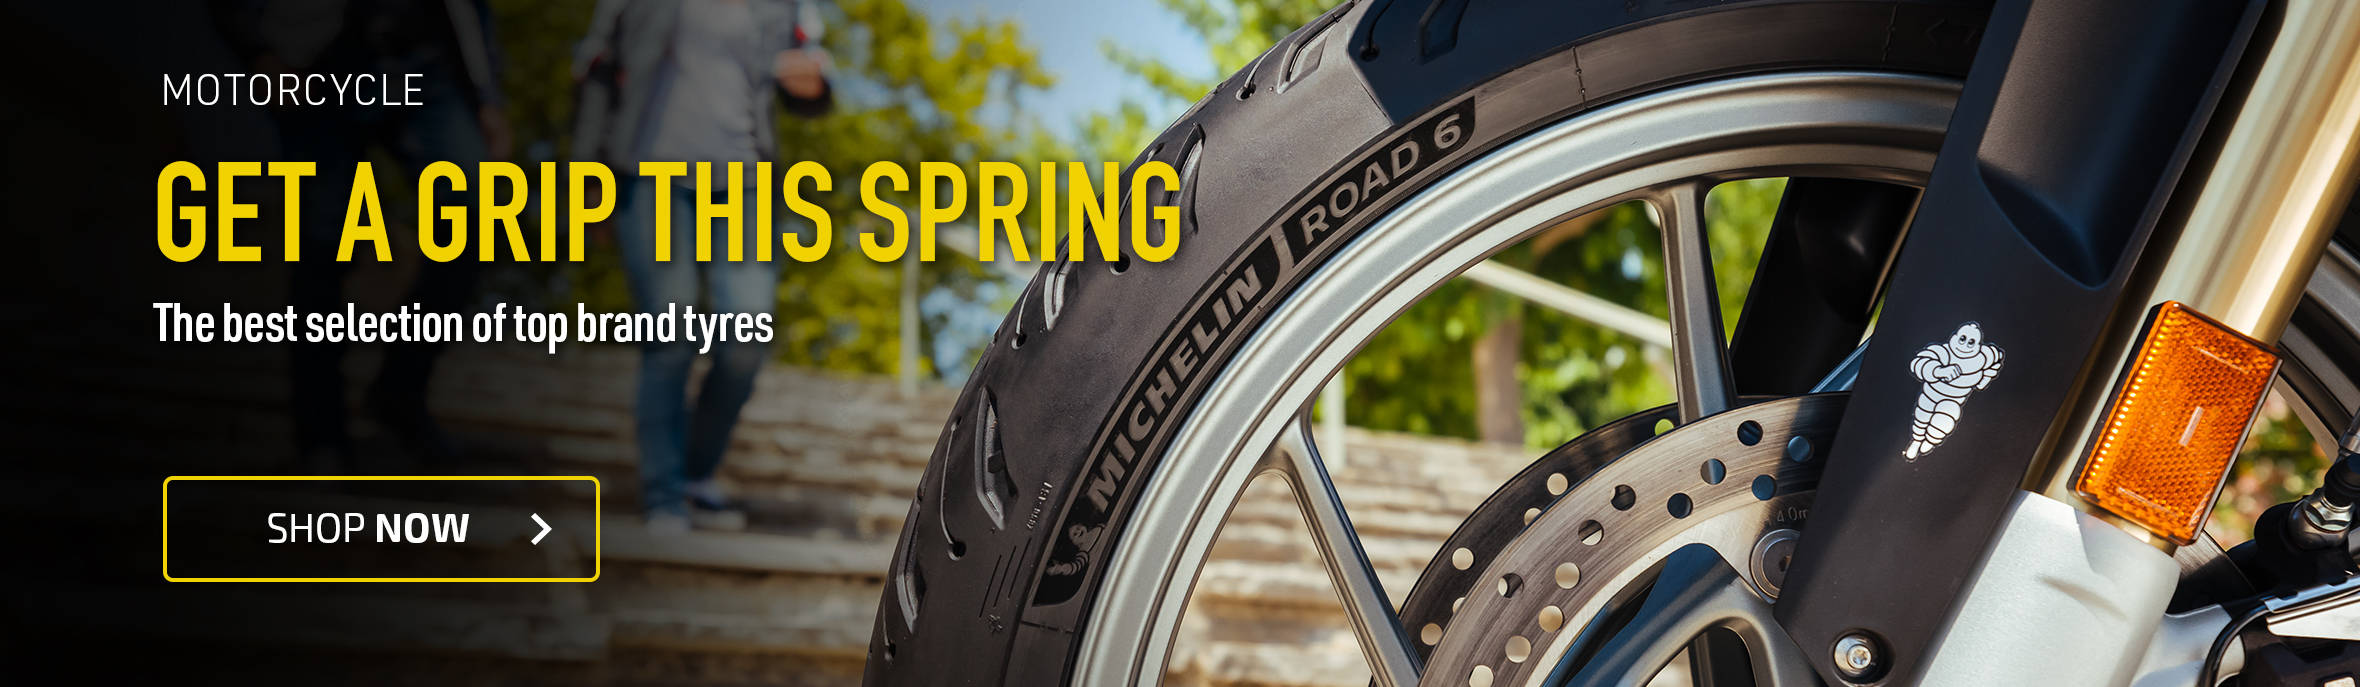 Get A Grip This Spring!